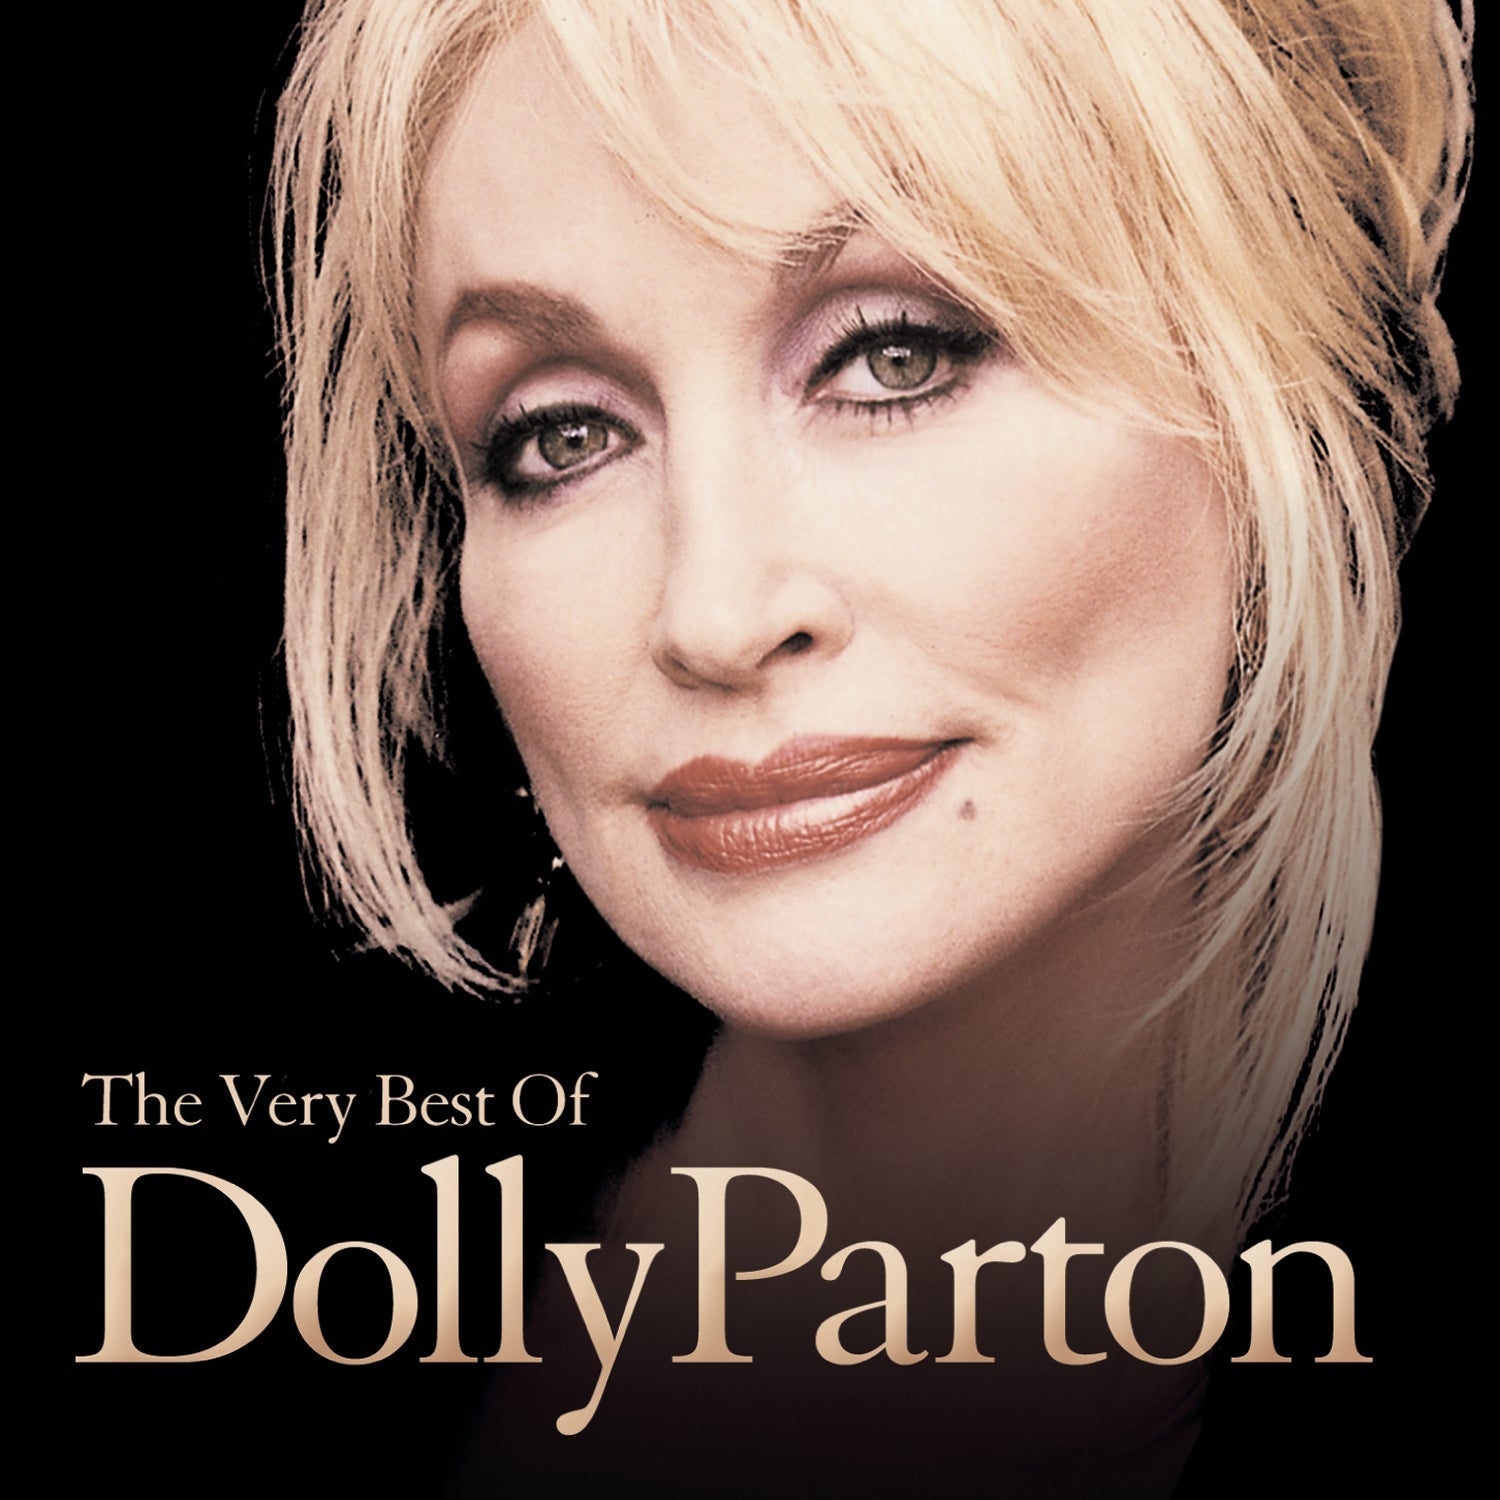 Dolly Parton-The Very Best Of Dolly Parton CD Album - SILBERSHELL